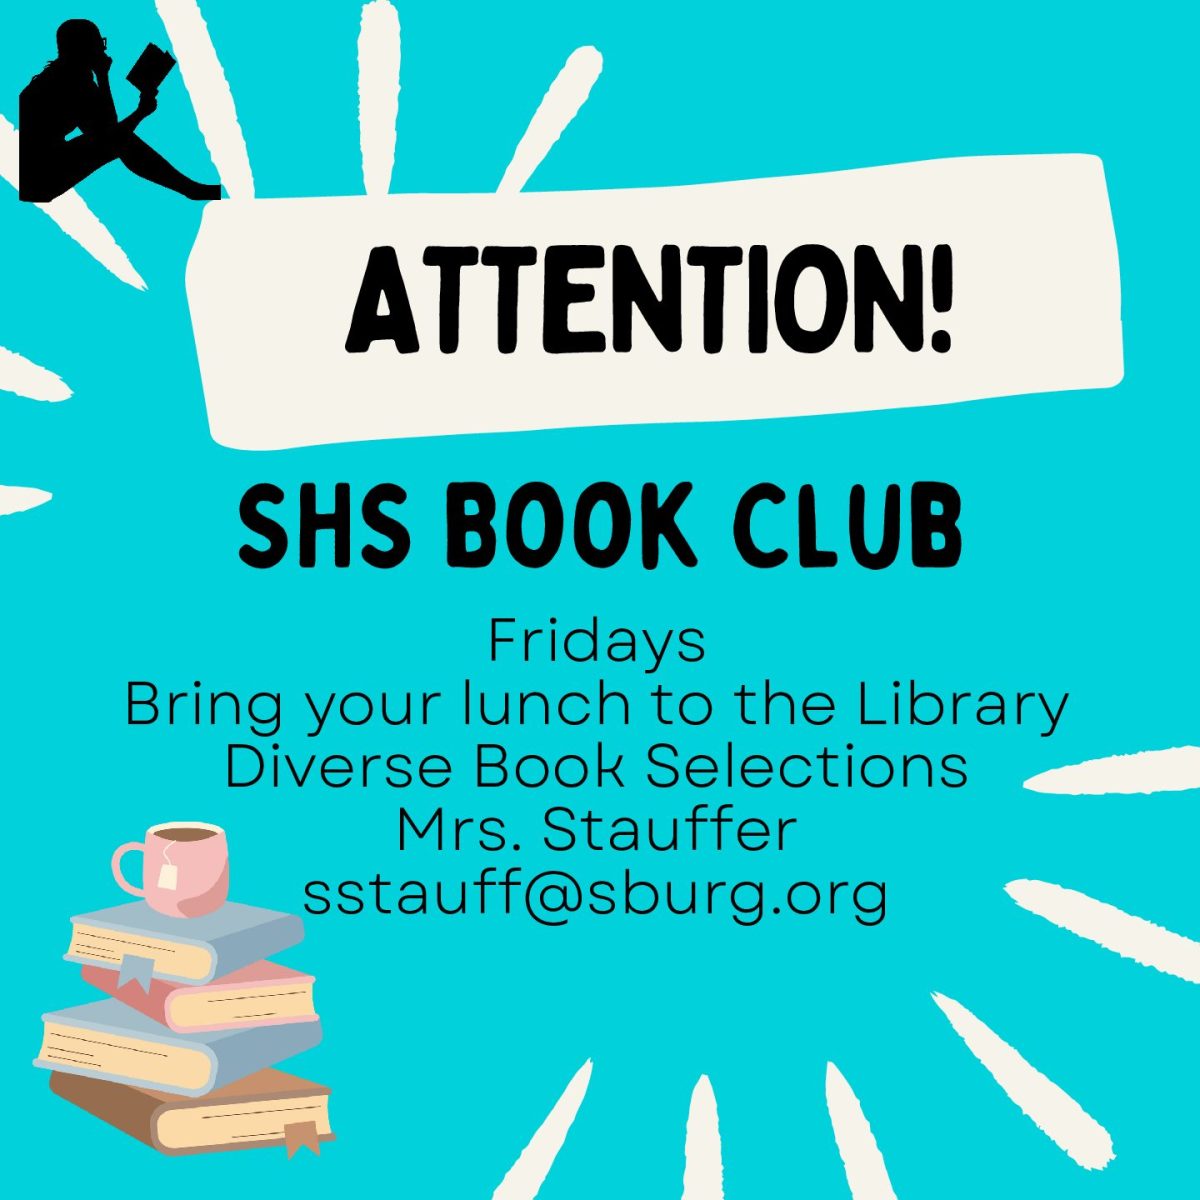 Interested in literature, join book club today and have fun discussions!